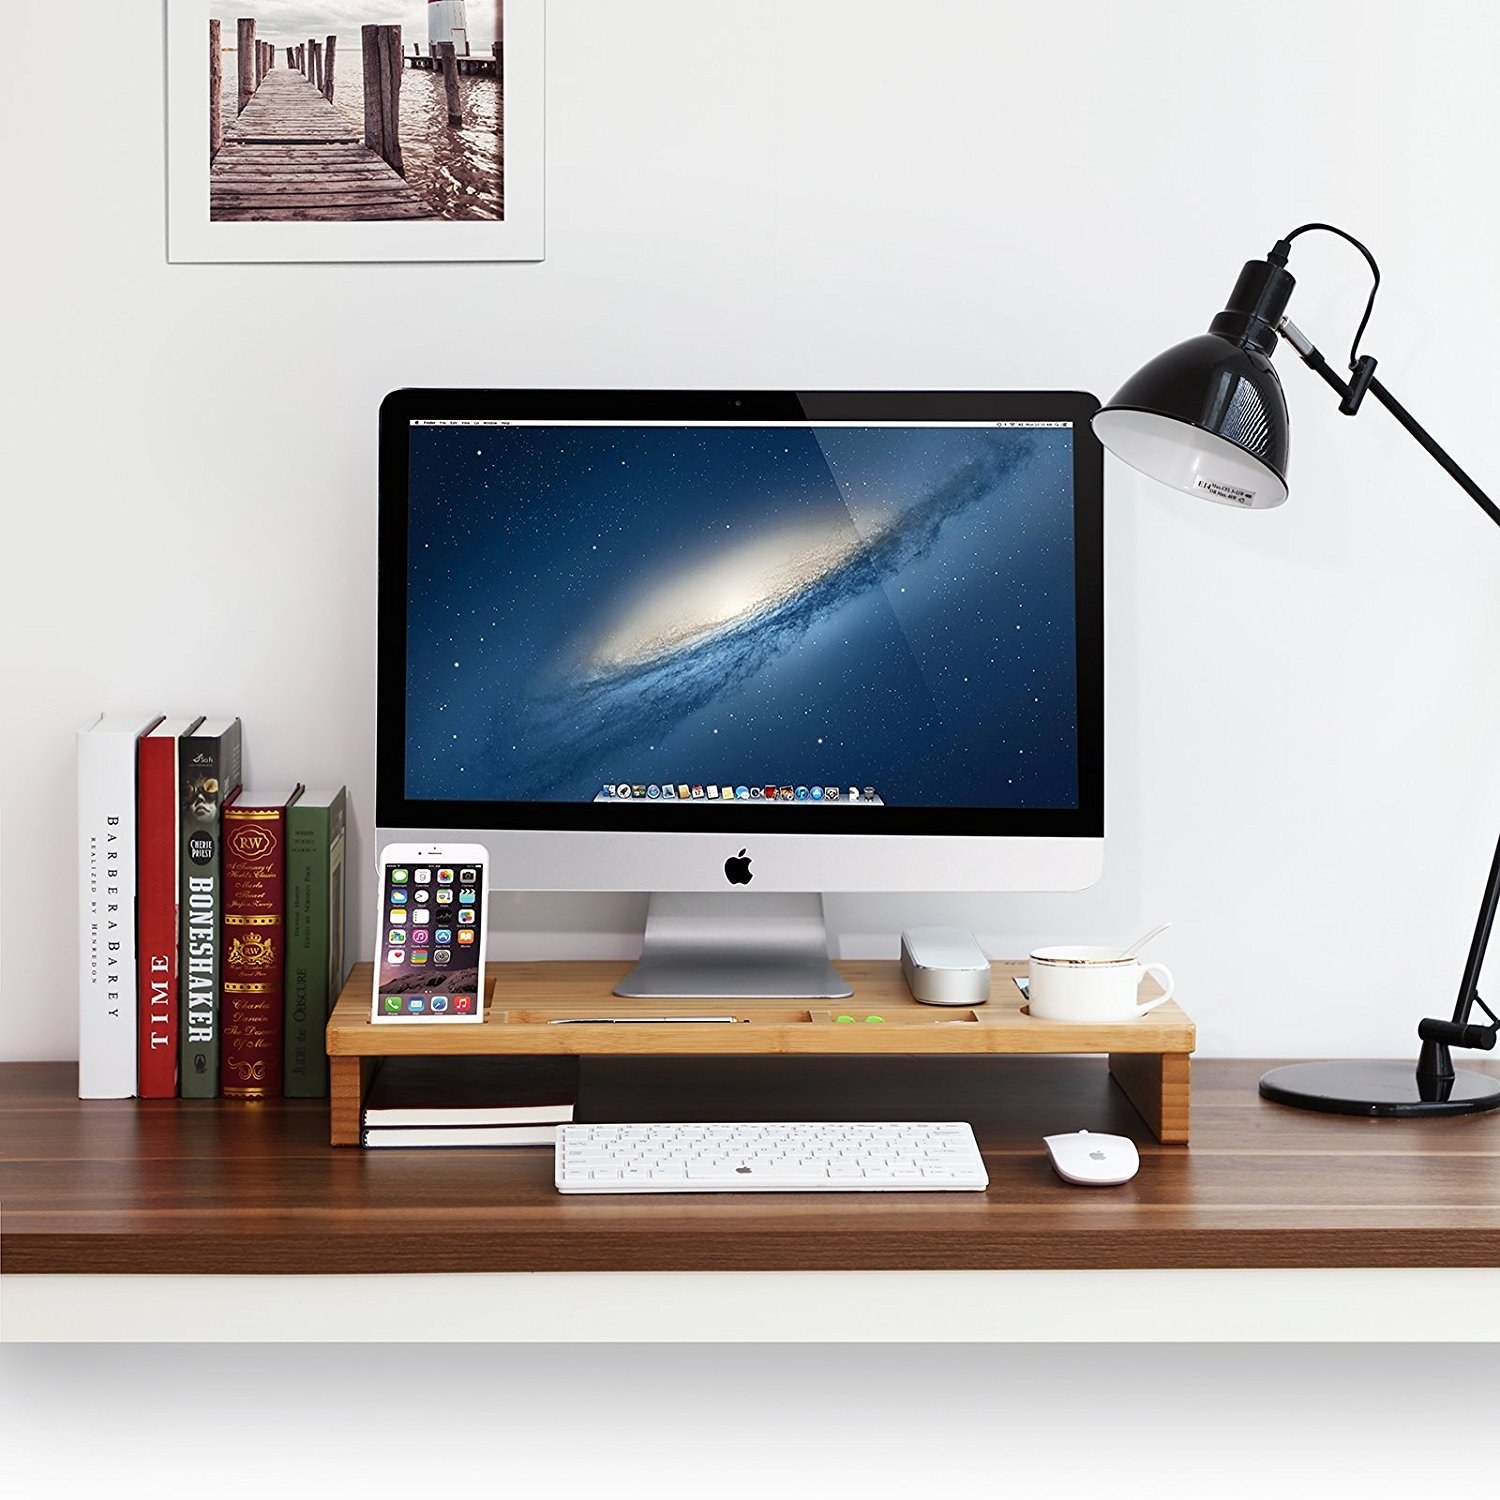 27 Things For Your Desk That'll Work As Hard As You Do